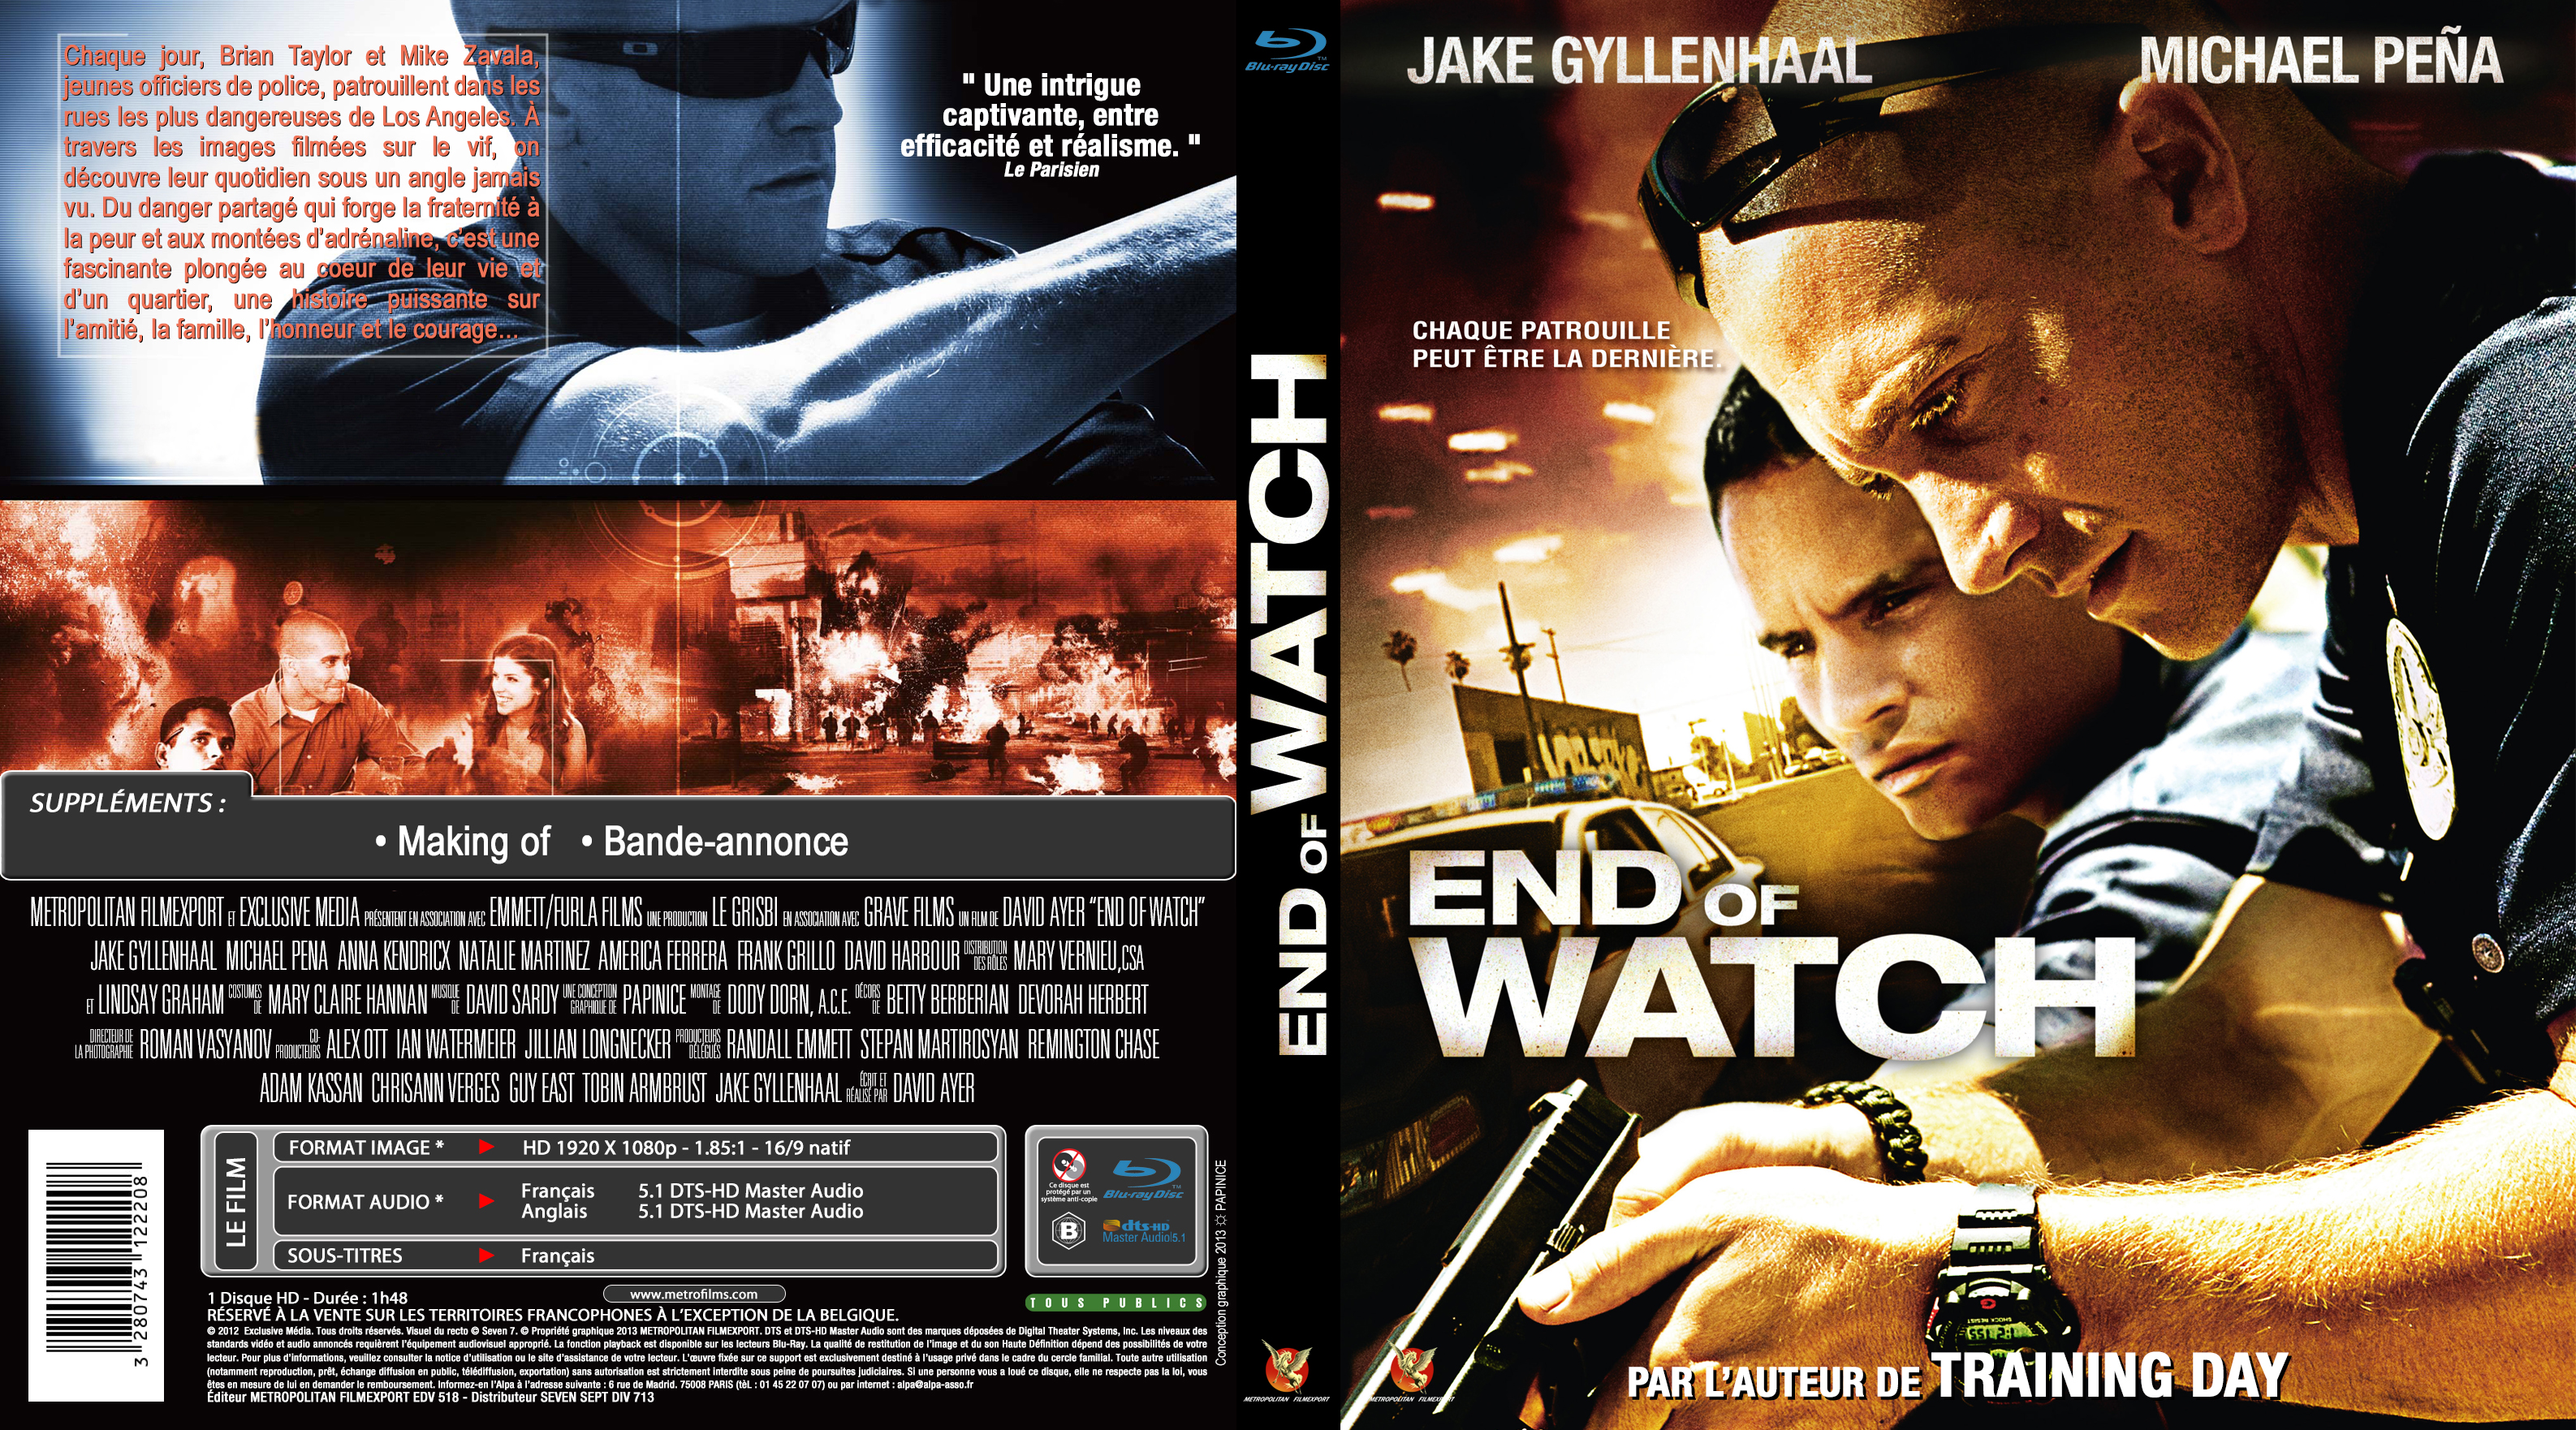 Jaquette DVD End of watch custom (BLU-RAY)